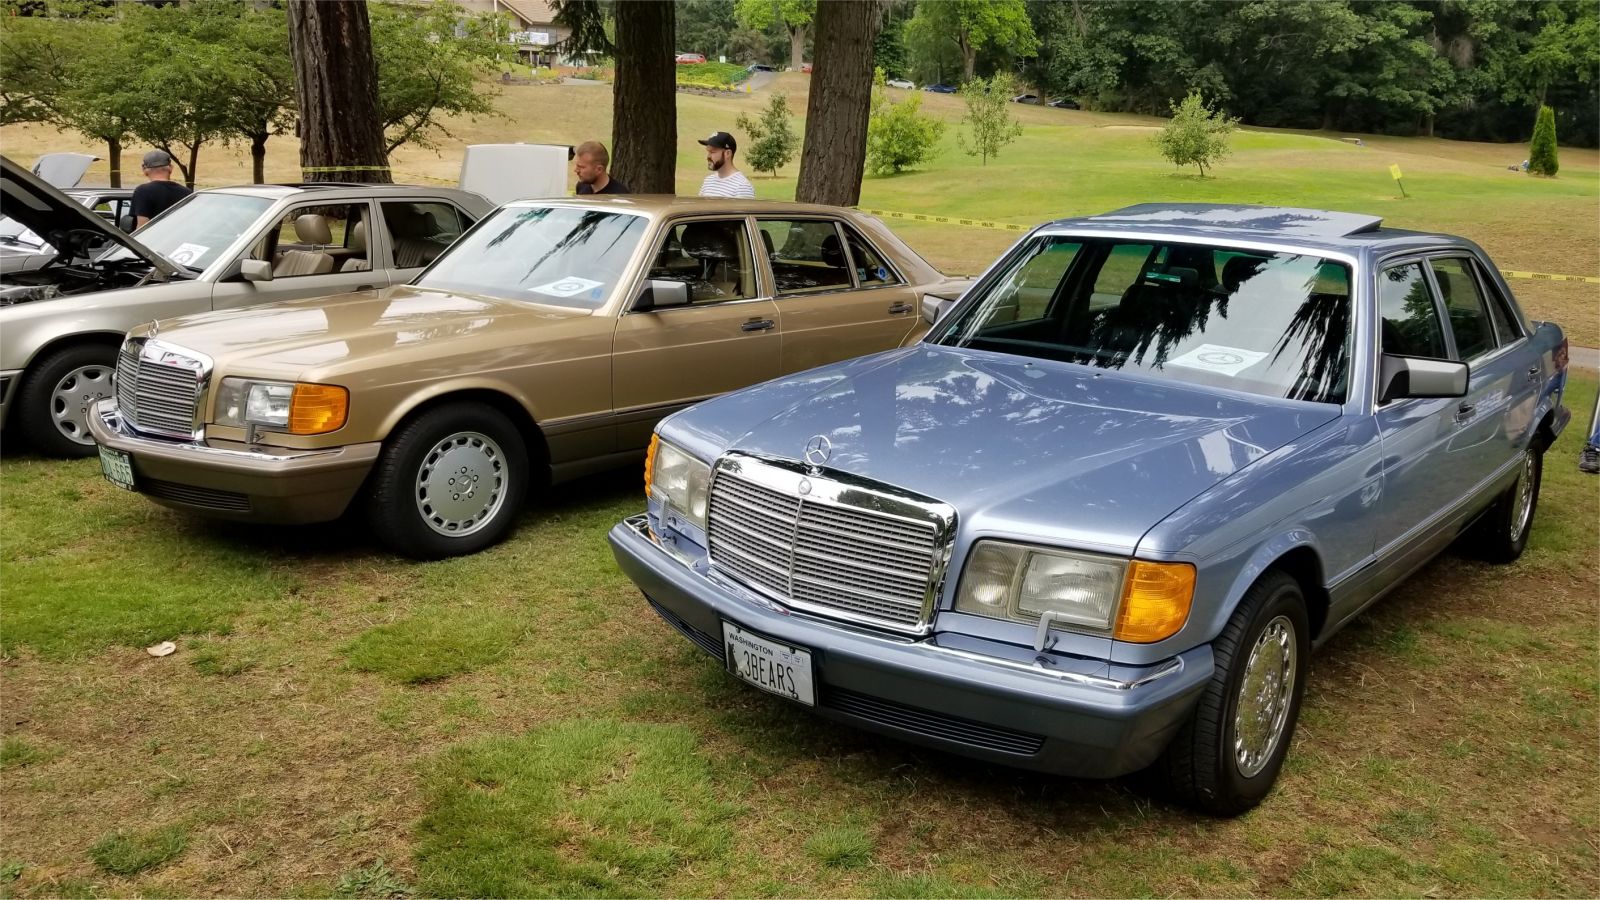 The 560 SEL at left was a 40K mile survivor in amazing condition. The blue car was also quite nice.